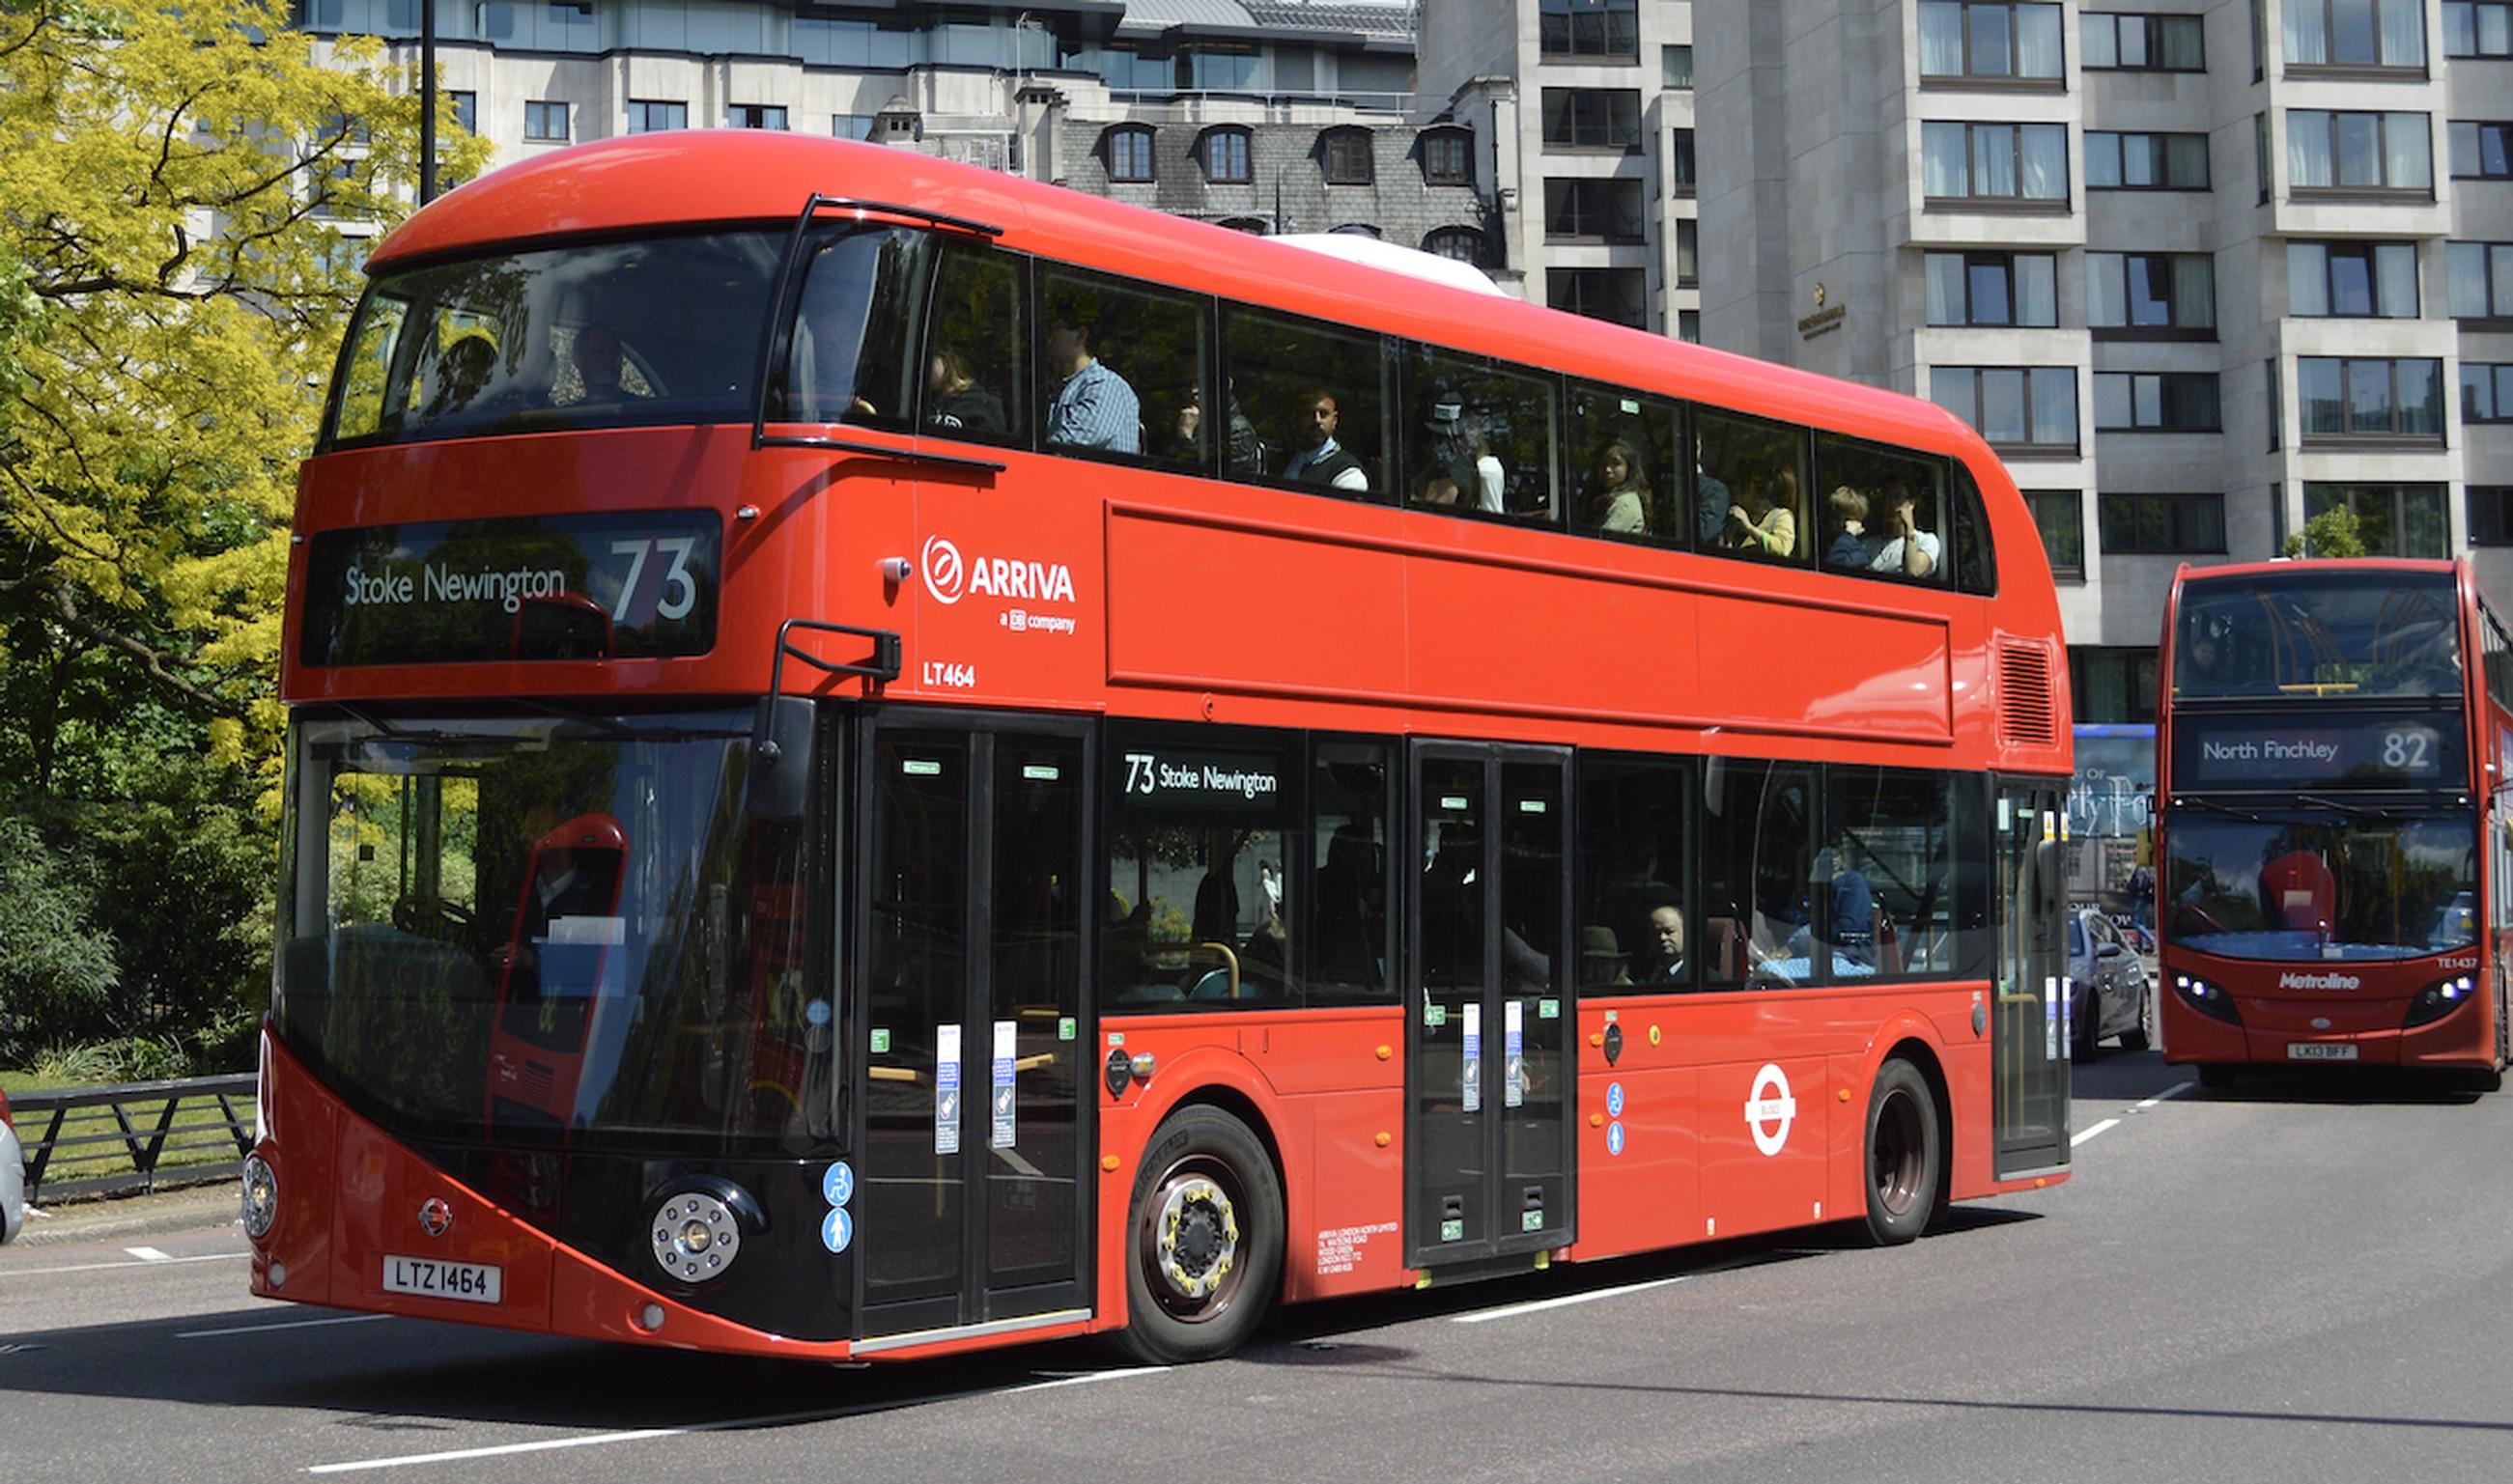 Lack of Government funding would make it impossible to refurbish 1,000 Routemaster buses, said Sadiq Khan